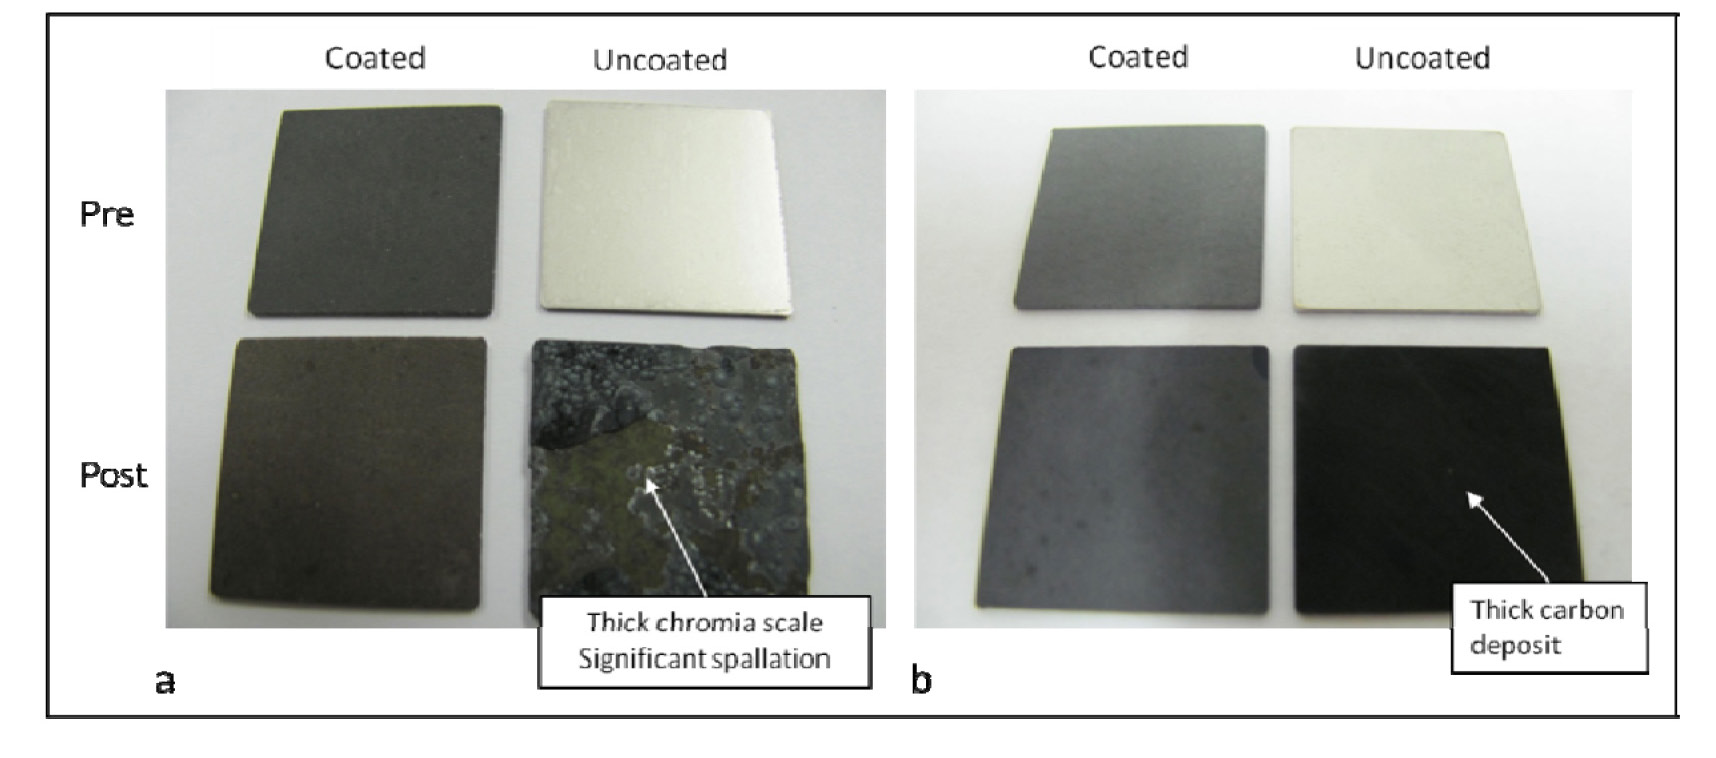 Appearance of coated and uncoated 304 austenitic stainless steel after (a) 500 hours in an oxidizing atmosphere at 900°C; and (b) 24 hours in a coking atmosphere at 600°C.